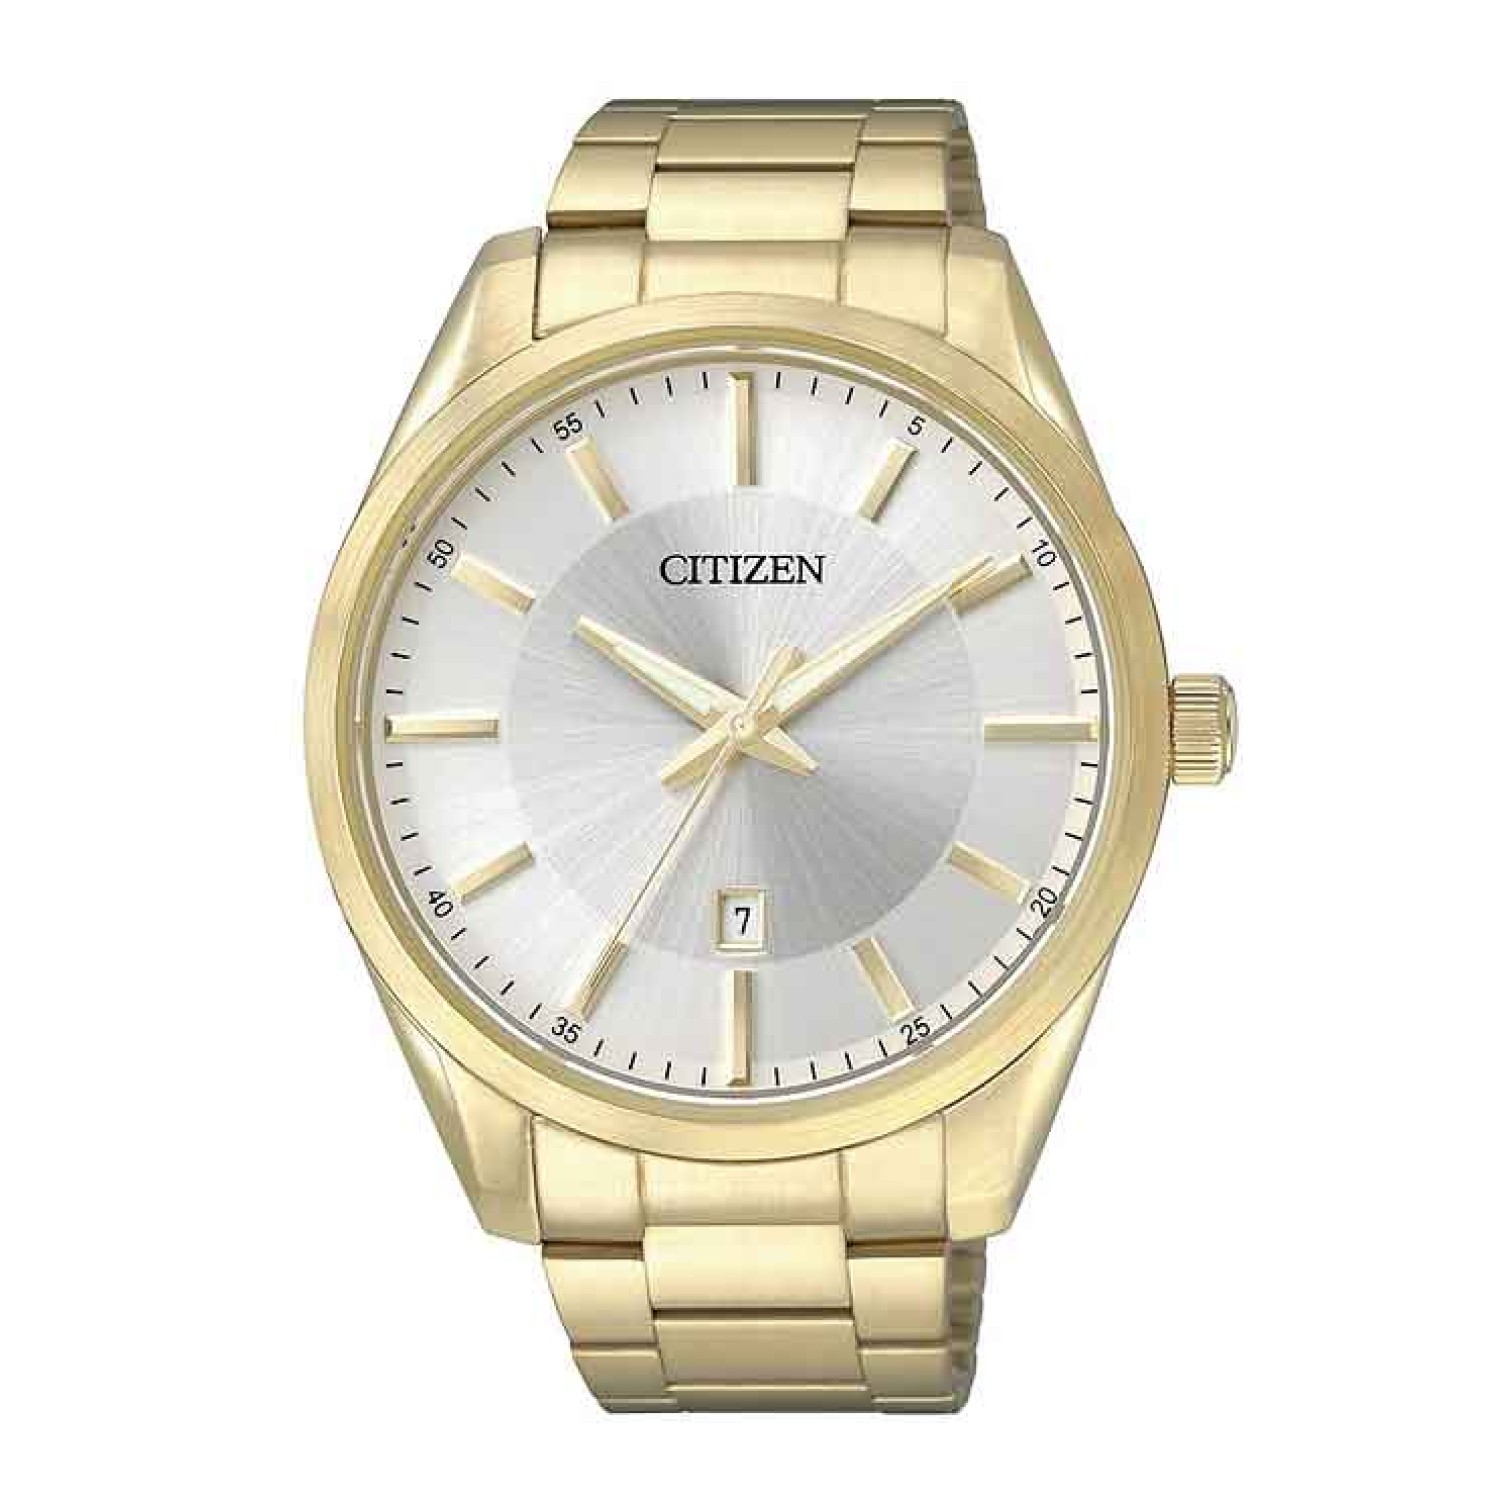 BI1032-58A Citizen Mens Watch. Second markings unobtrusively line the border for your reference. The burnished yellow-plated stainless steel casing matches and highlights the face details, and blends seamlessly with the gold-toned durable bracelet. Fe @ch